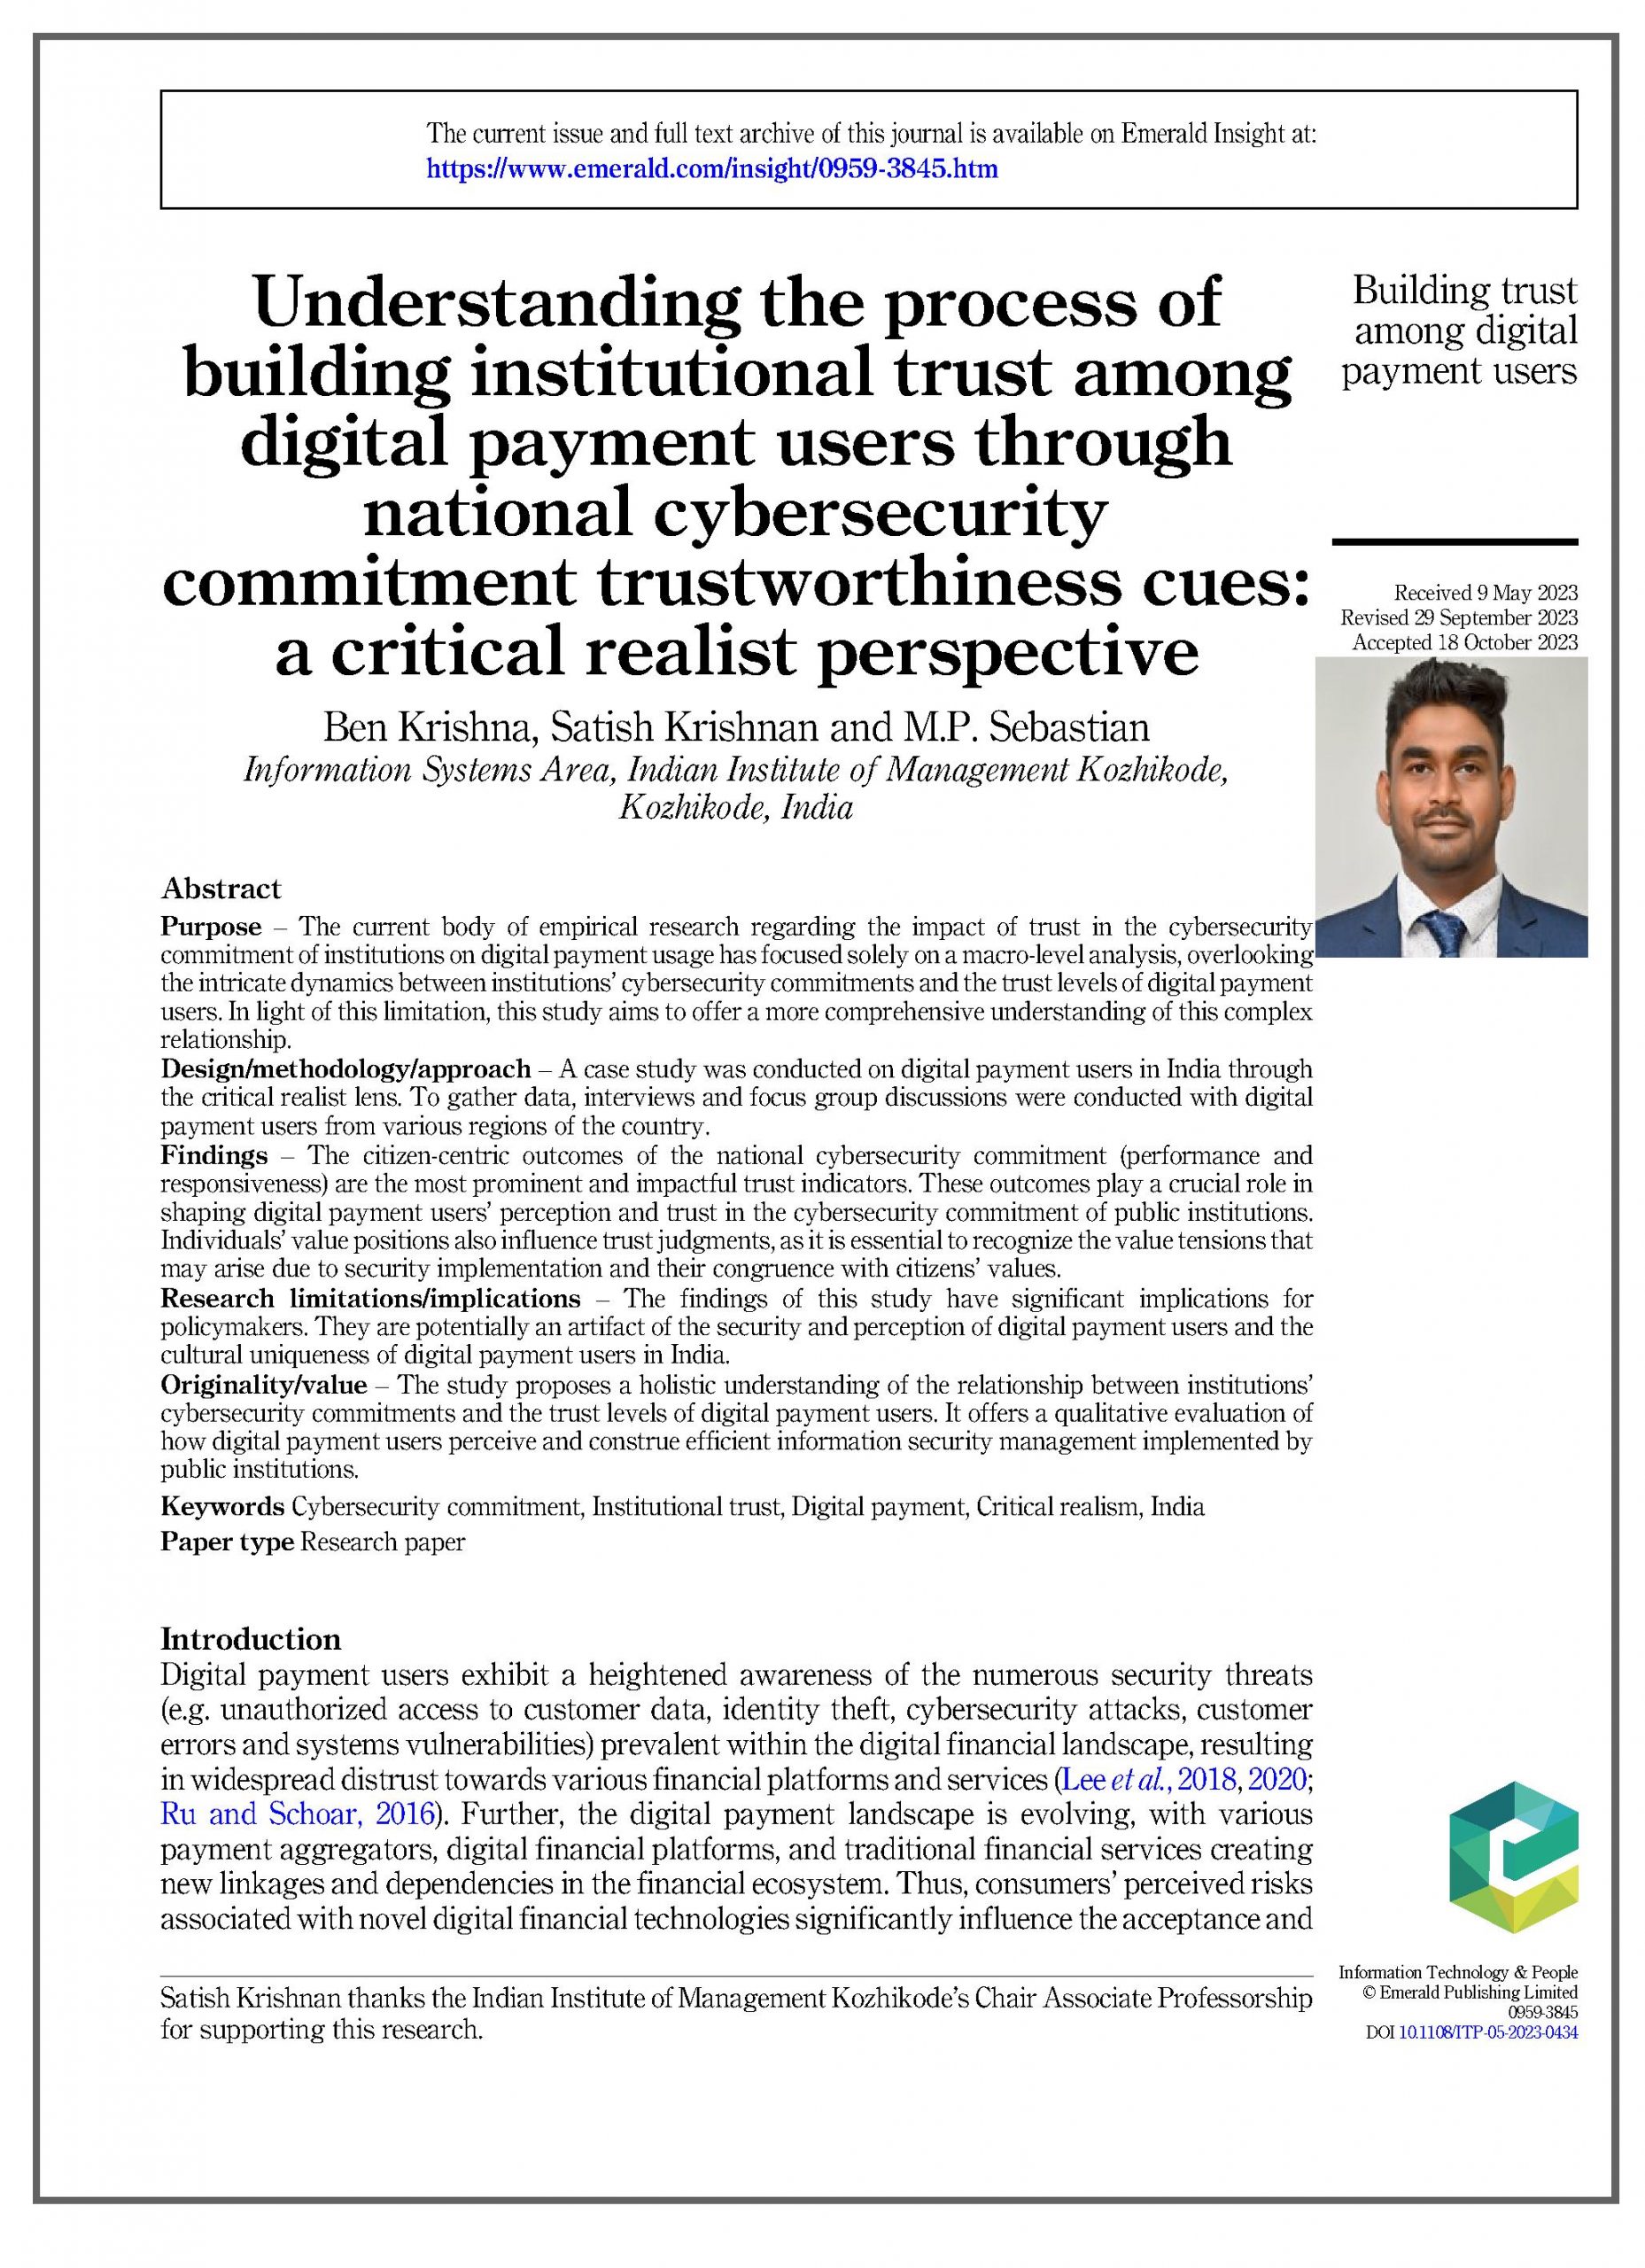 Understanding the process of building institutional trust among digital payment users through national cybersecurity commitment trustworthiness cues: a critical realist perspective